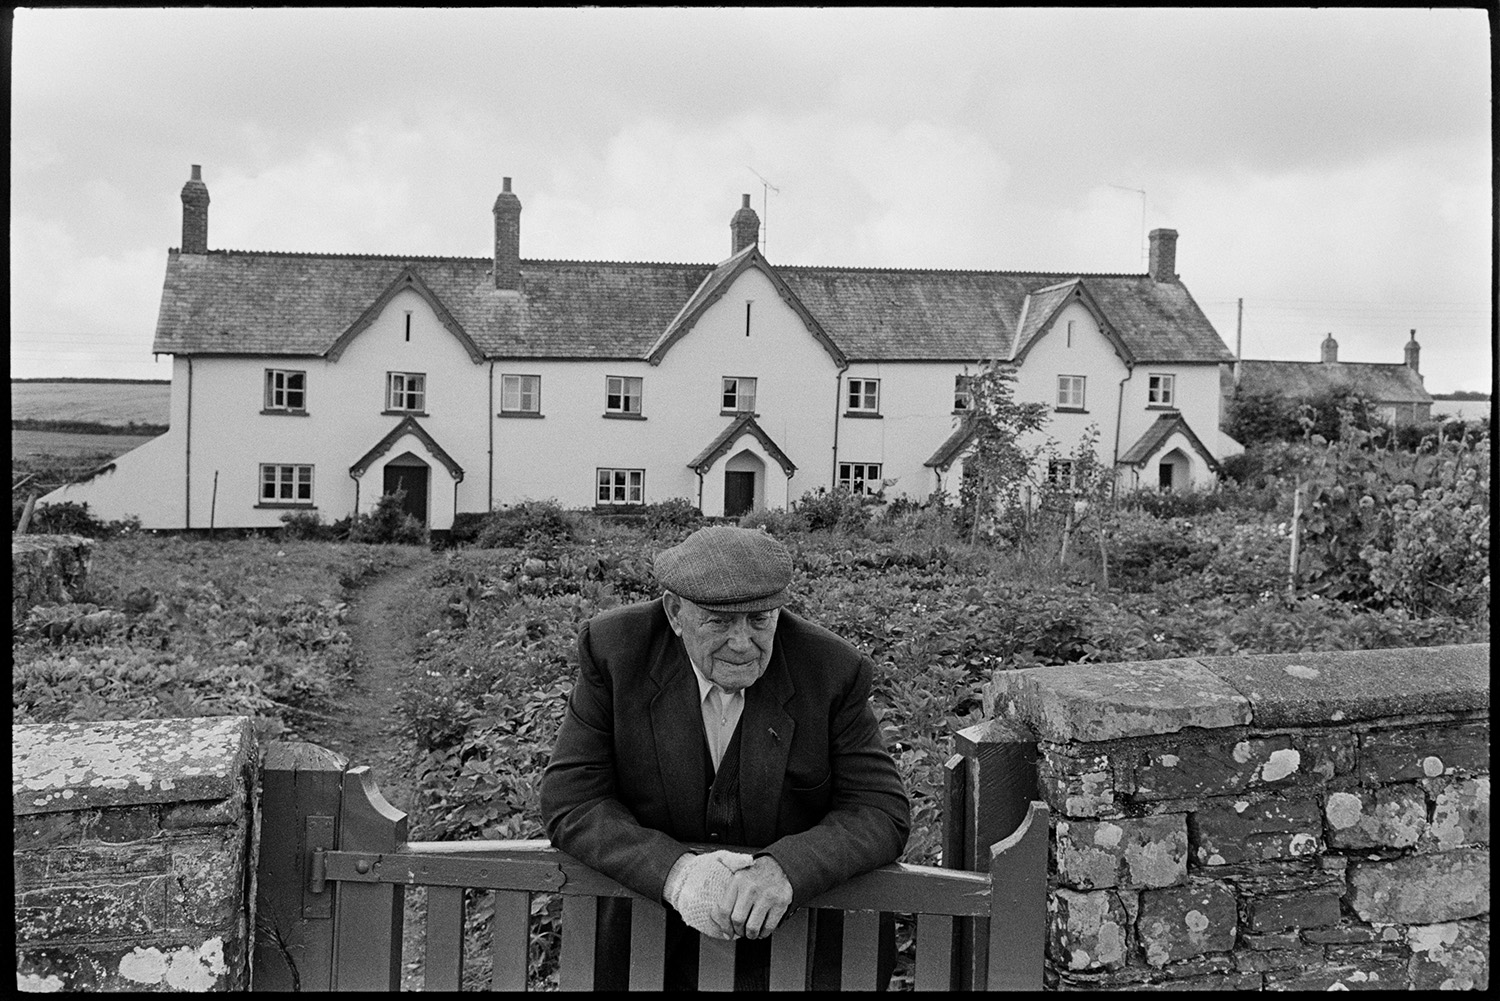 Man leaning over garden gate in front of estate cottages. 
[A man leaning on the gate at the entrance to terraced estate cottages and gardens at Merton.]